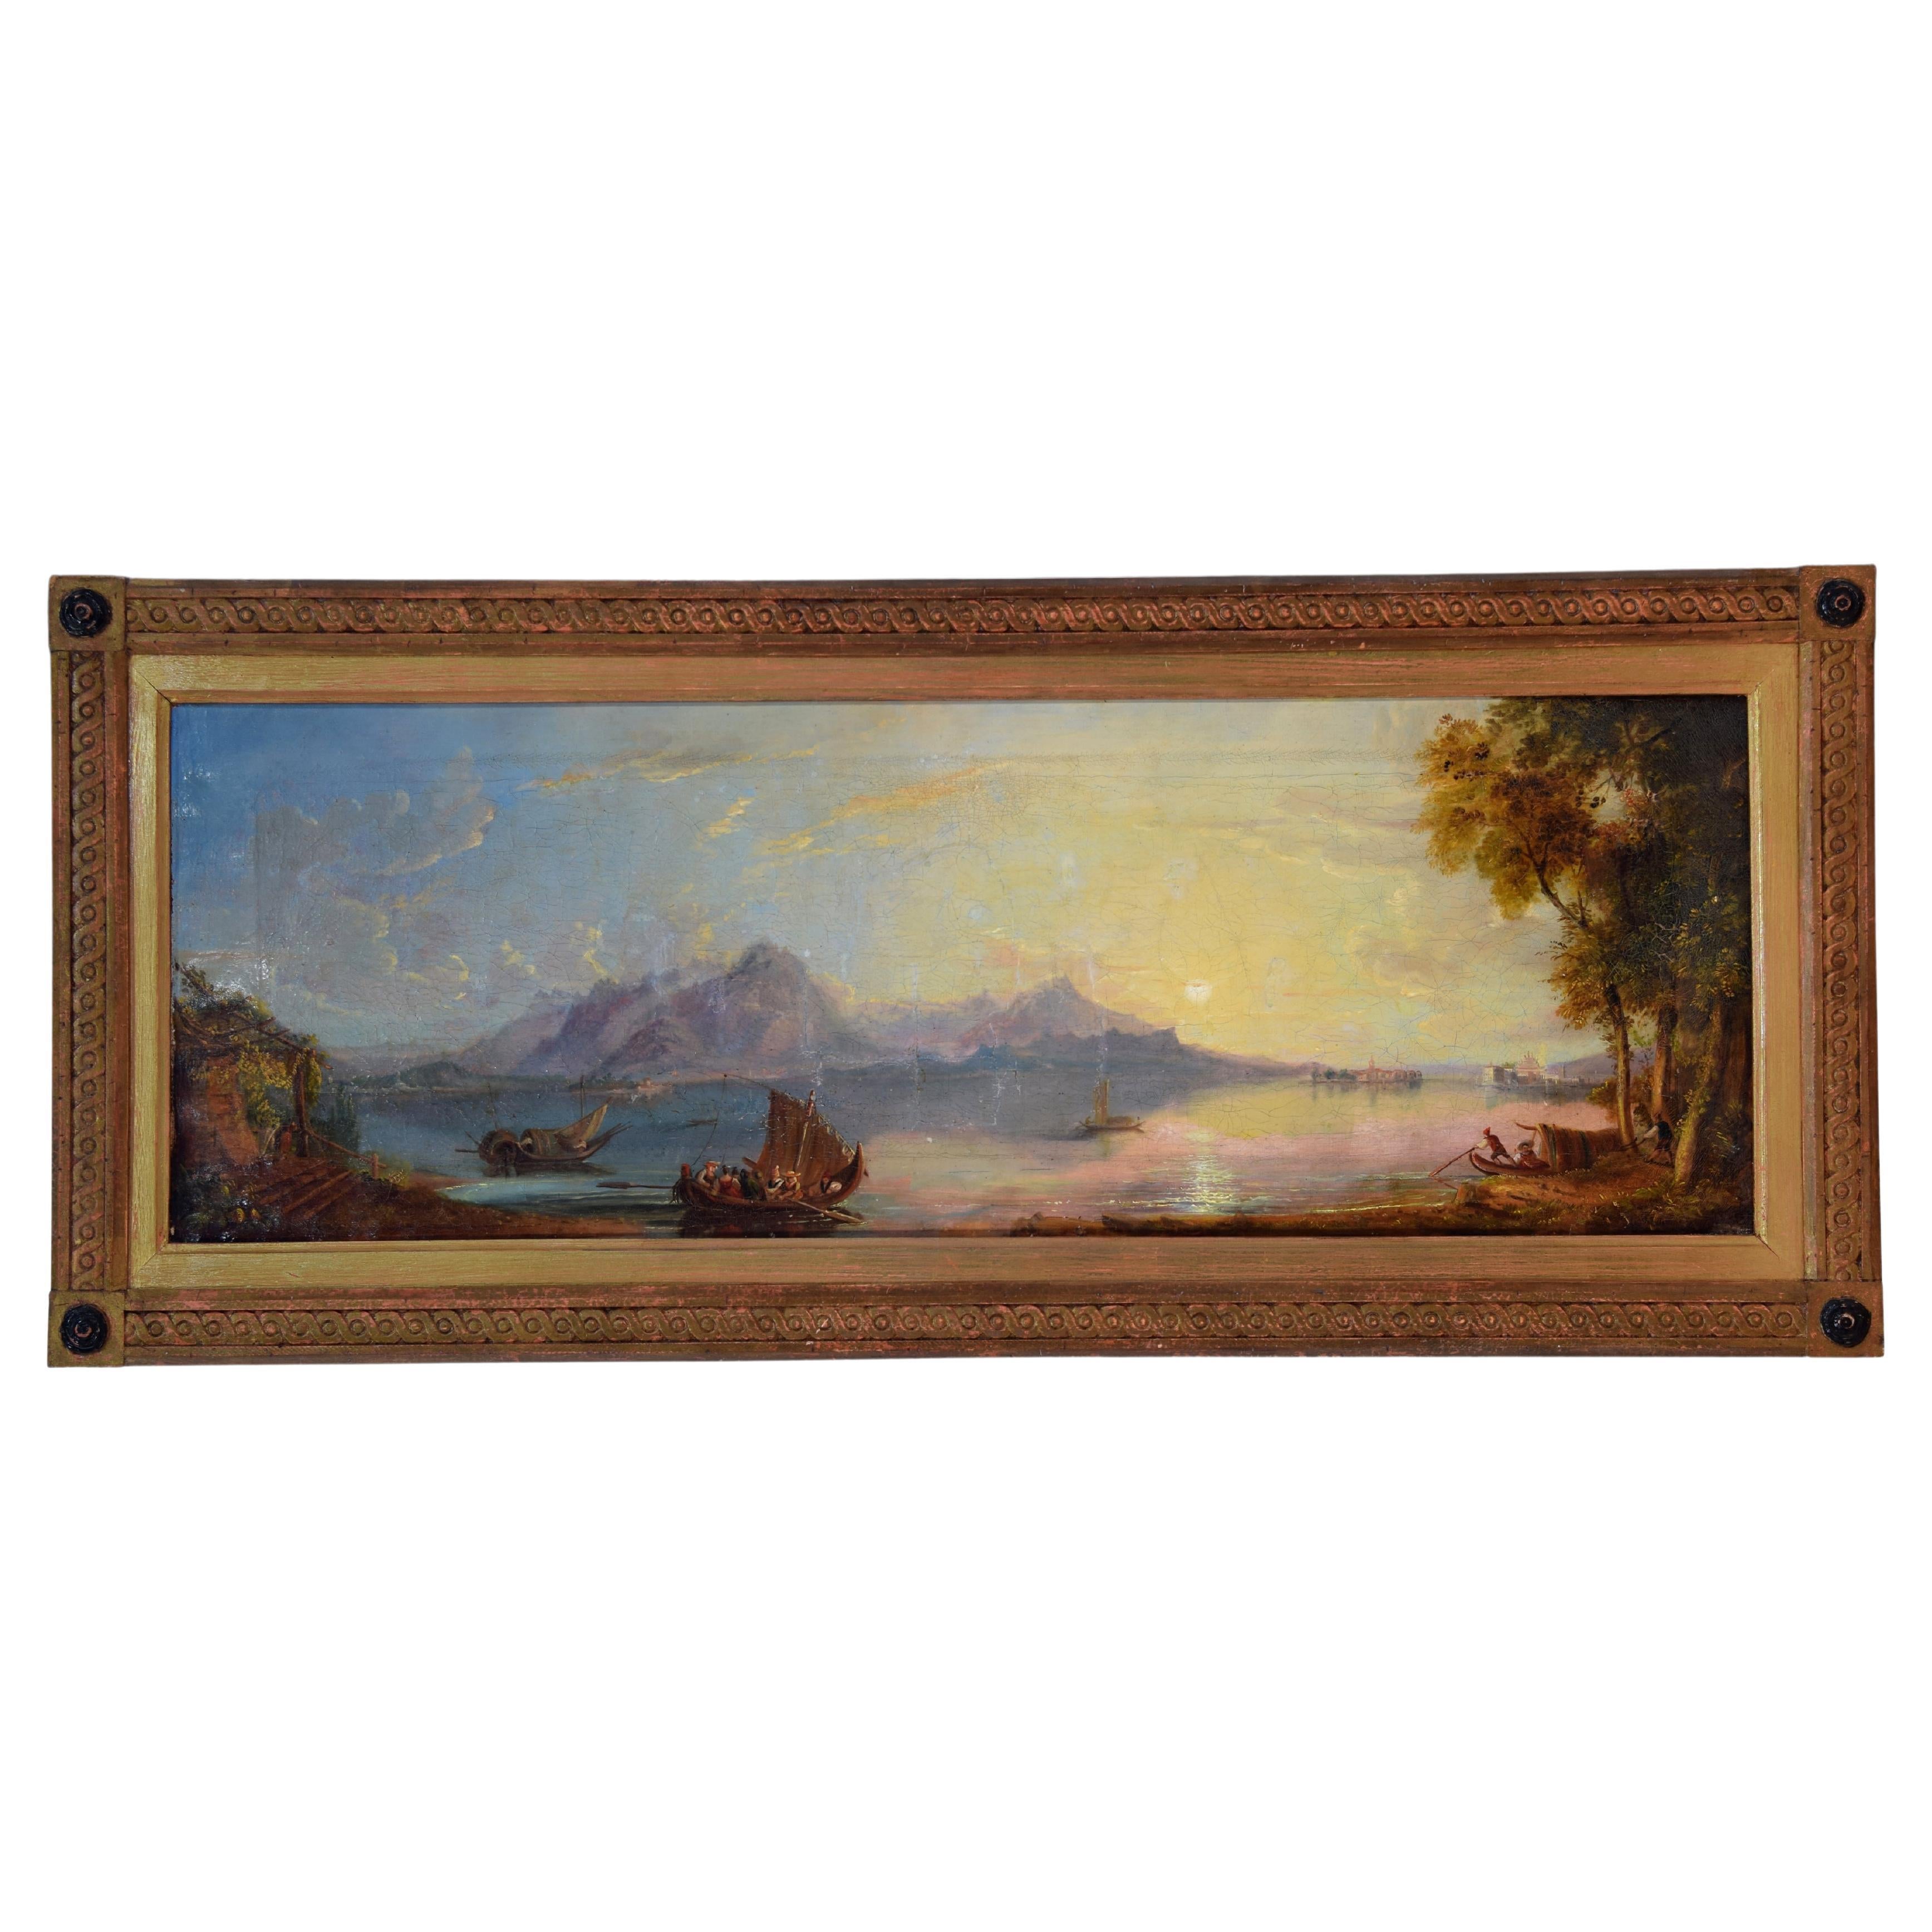 Landscape with Lake, Oil on Canvas, 18th Century